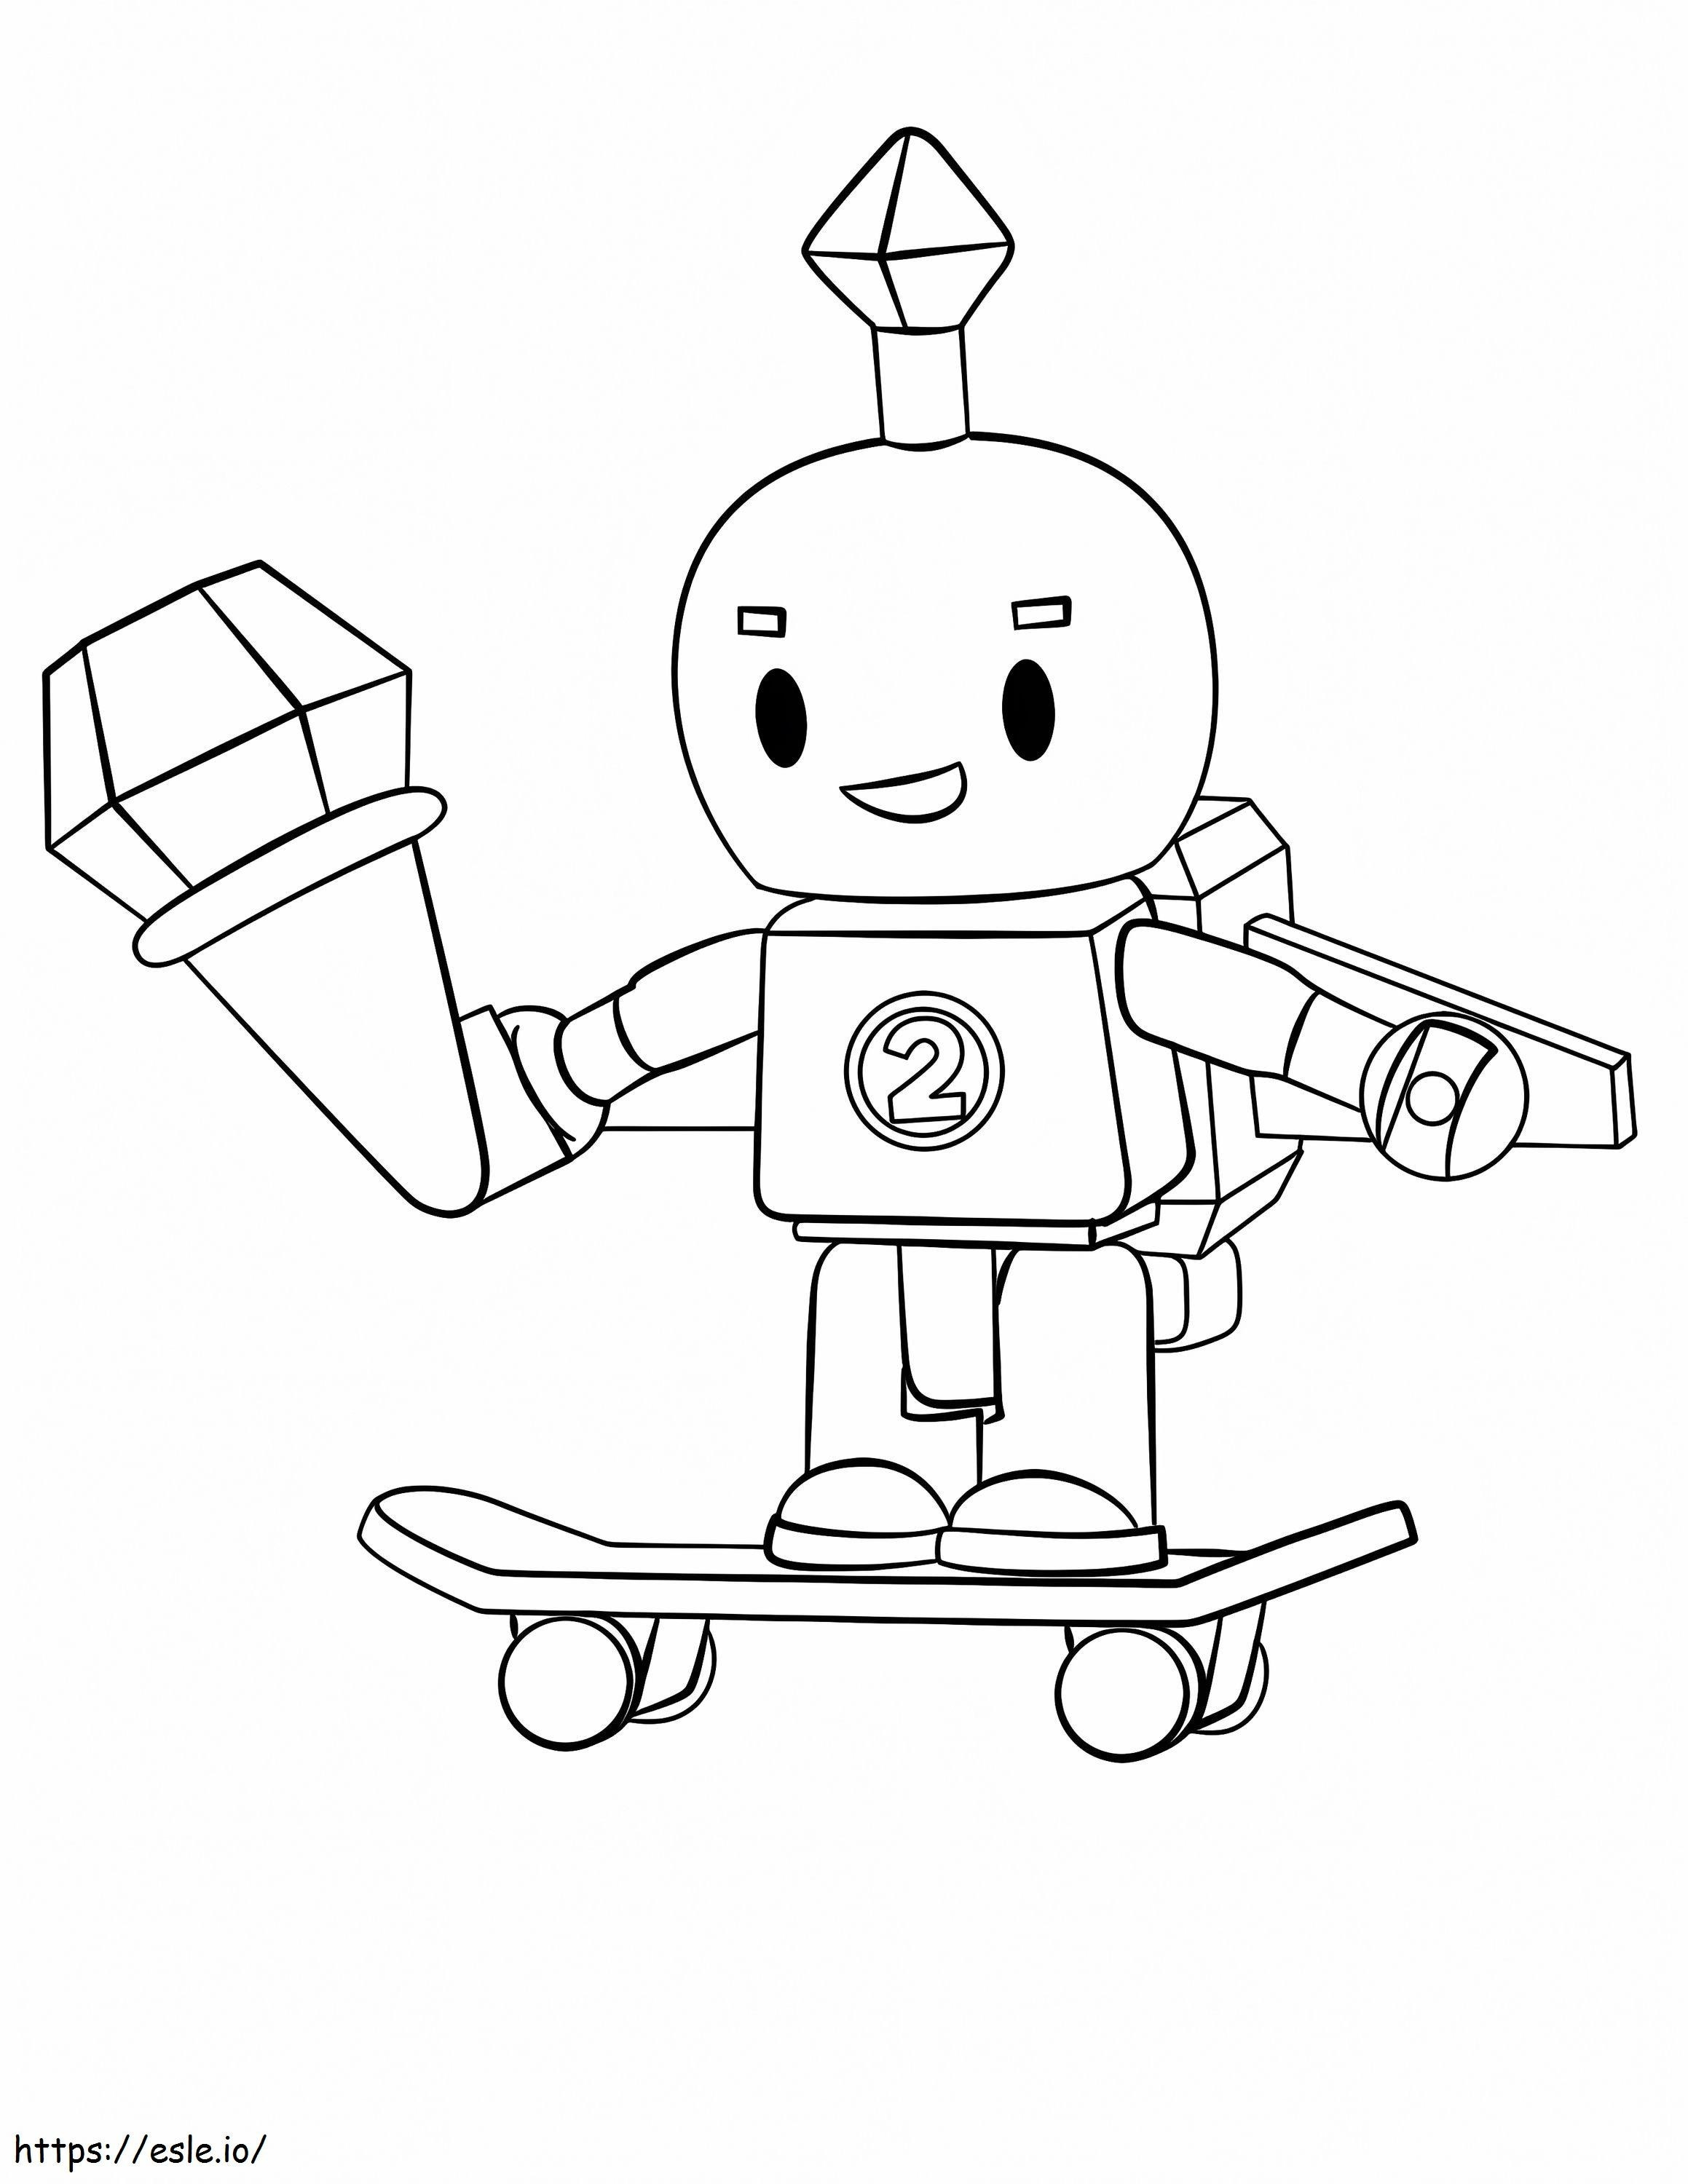 1578906714 Roblox Robot coloring page